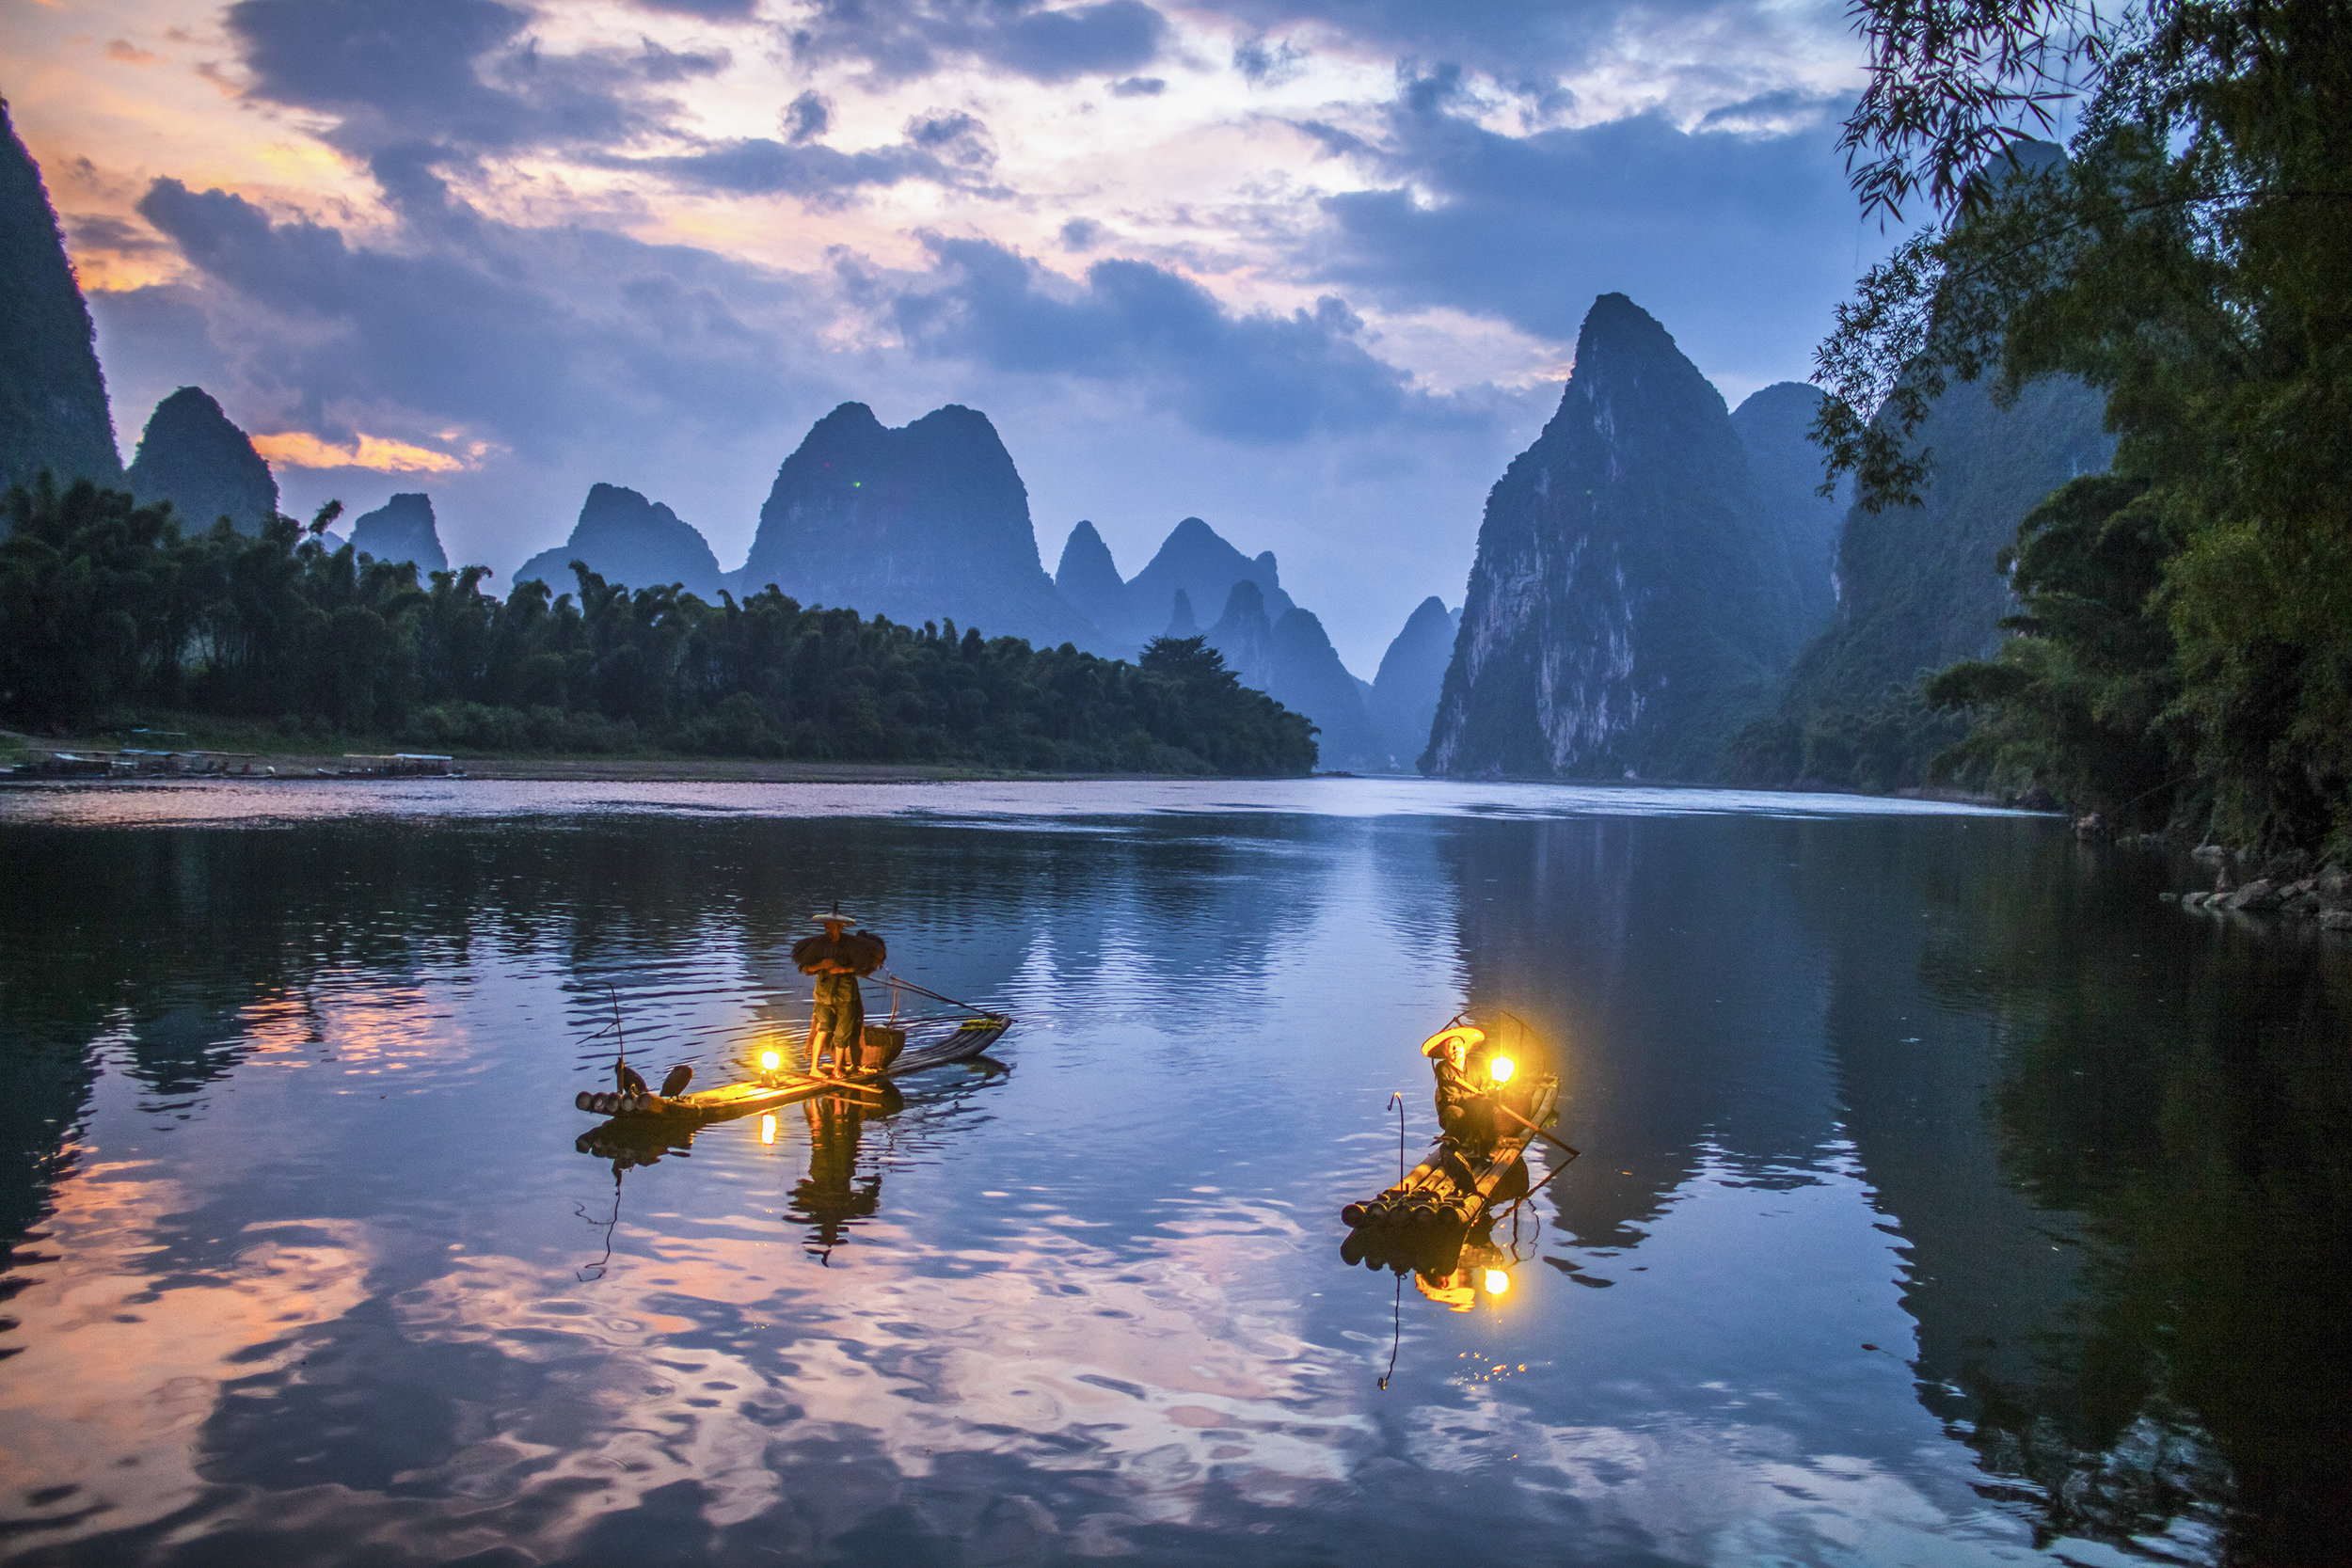 The natural beauty of the 83-kilometer stretch of the Li River between Guilin and Yangshuo   has been the inspiration for generations of Chinese painters and poets. The crystal-clear river meanders through rolling hills, remarkable cliffs, star…